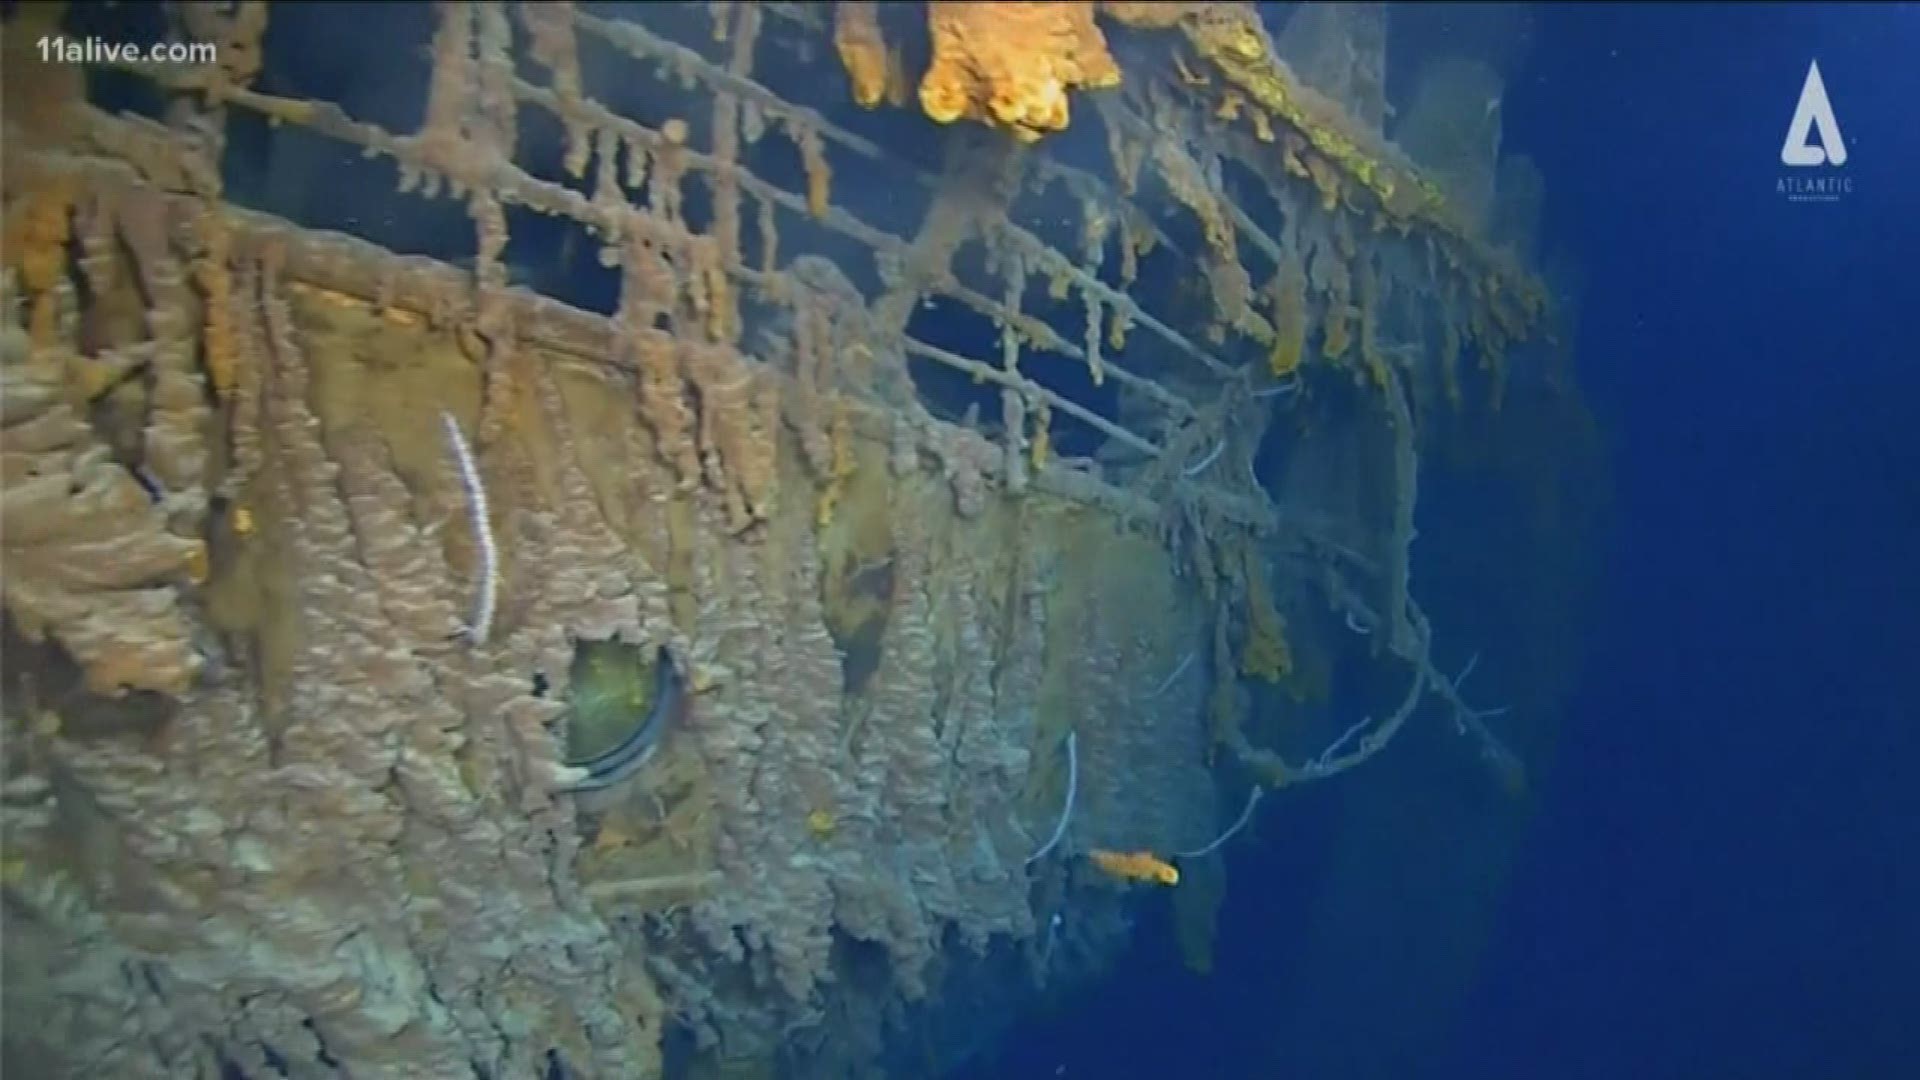 More than a century after the sinking of the Titanic, new technology is giving us a new view of the ship.